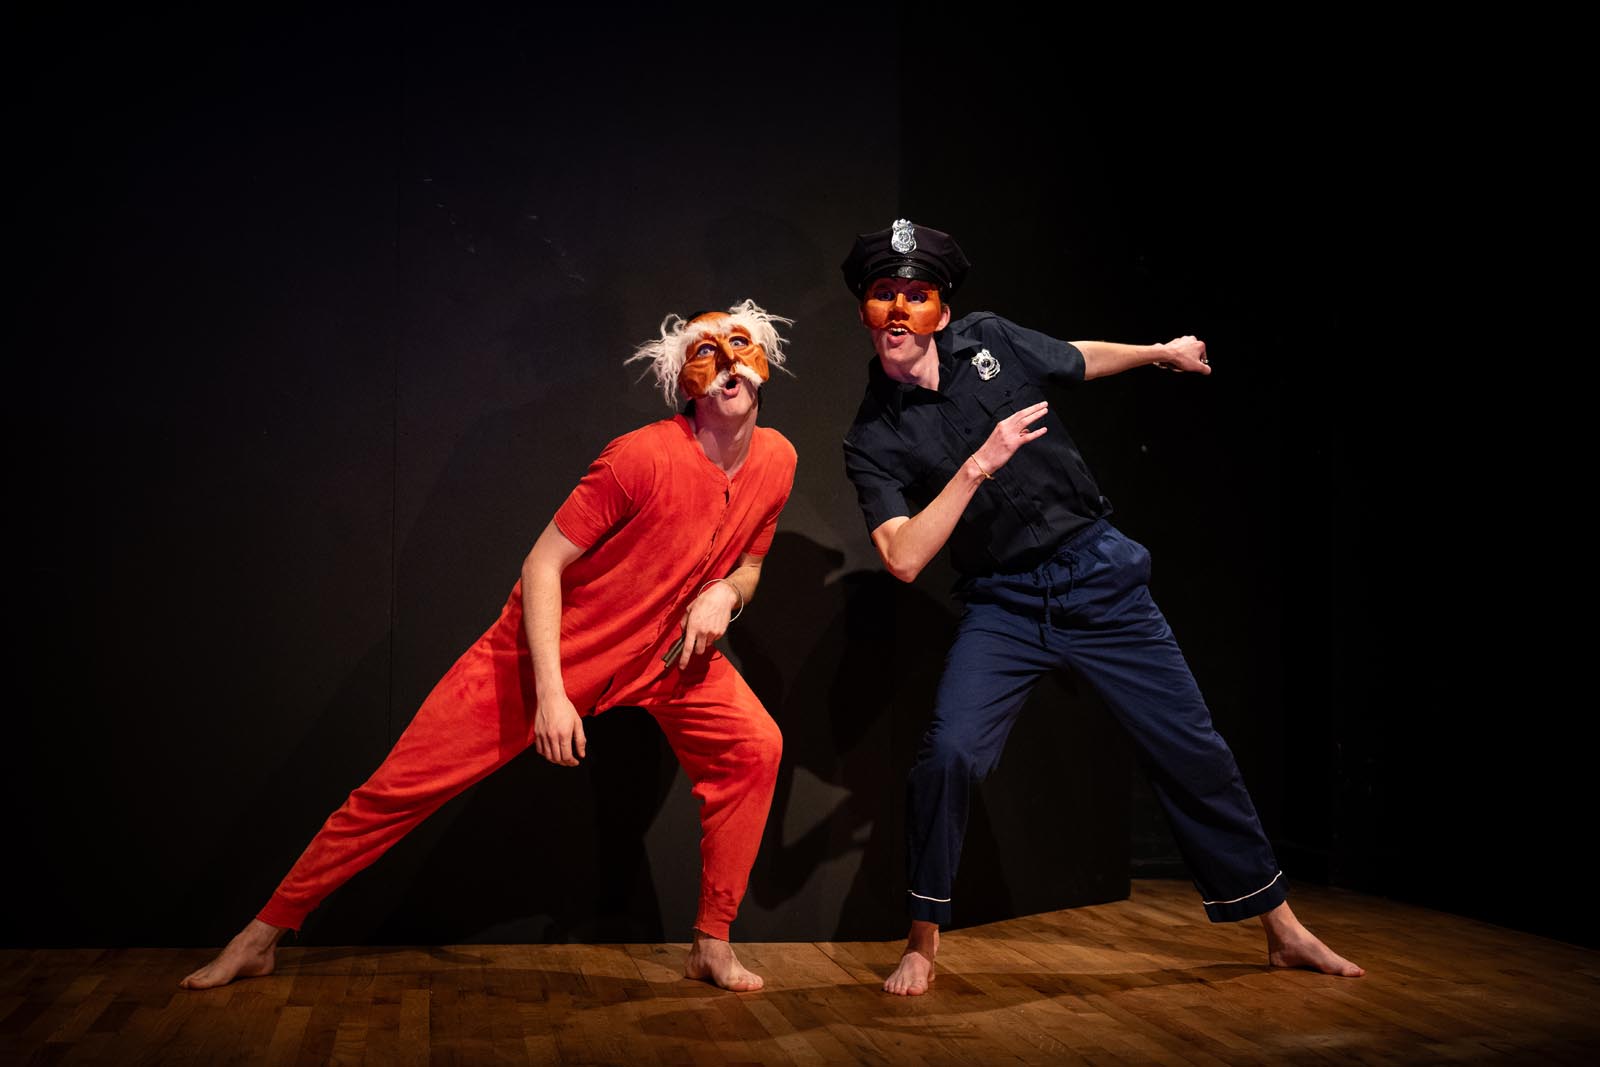 two masked performers, one in red long underwear, the other dressed as a police officer